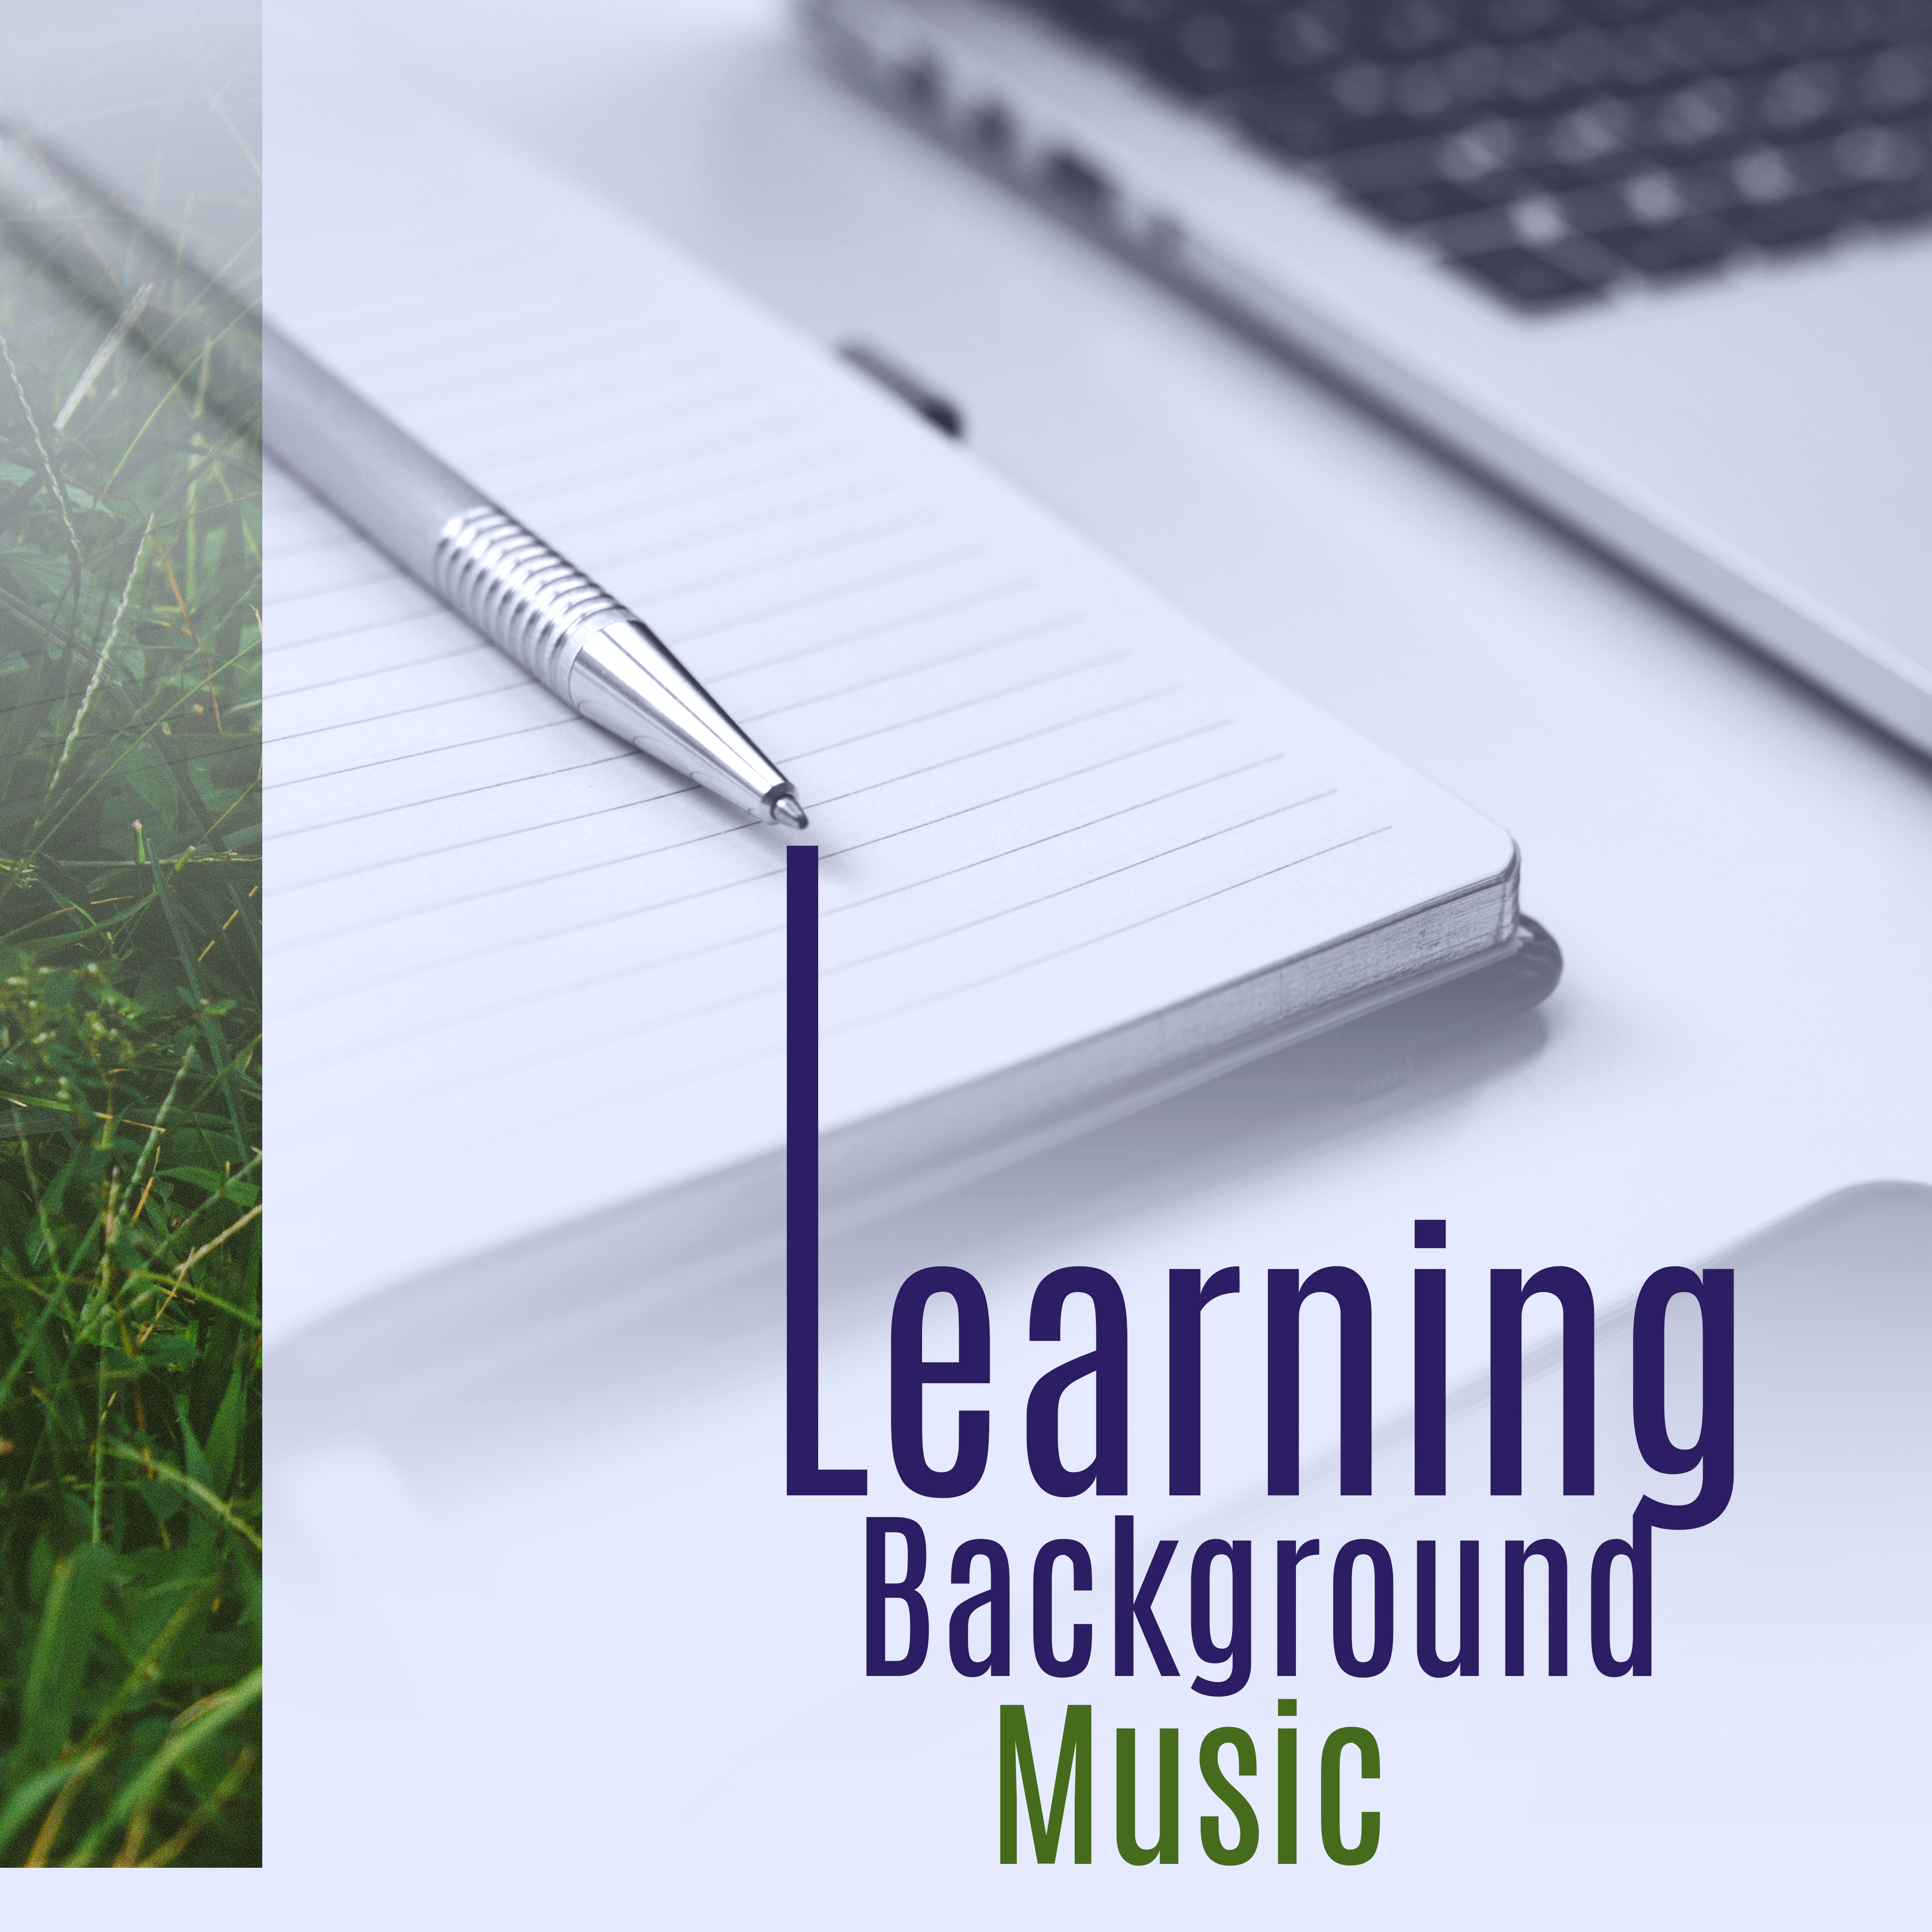 Learning Background Music  Soft Sounds of Nature, Relaxing Music, Easy Study, Keep Focus